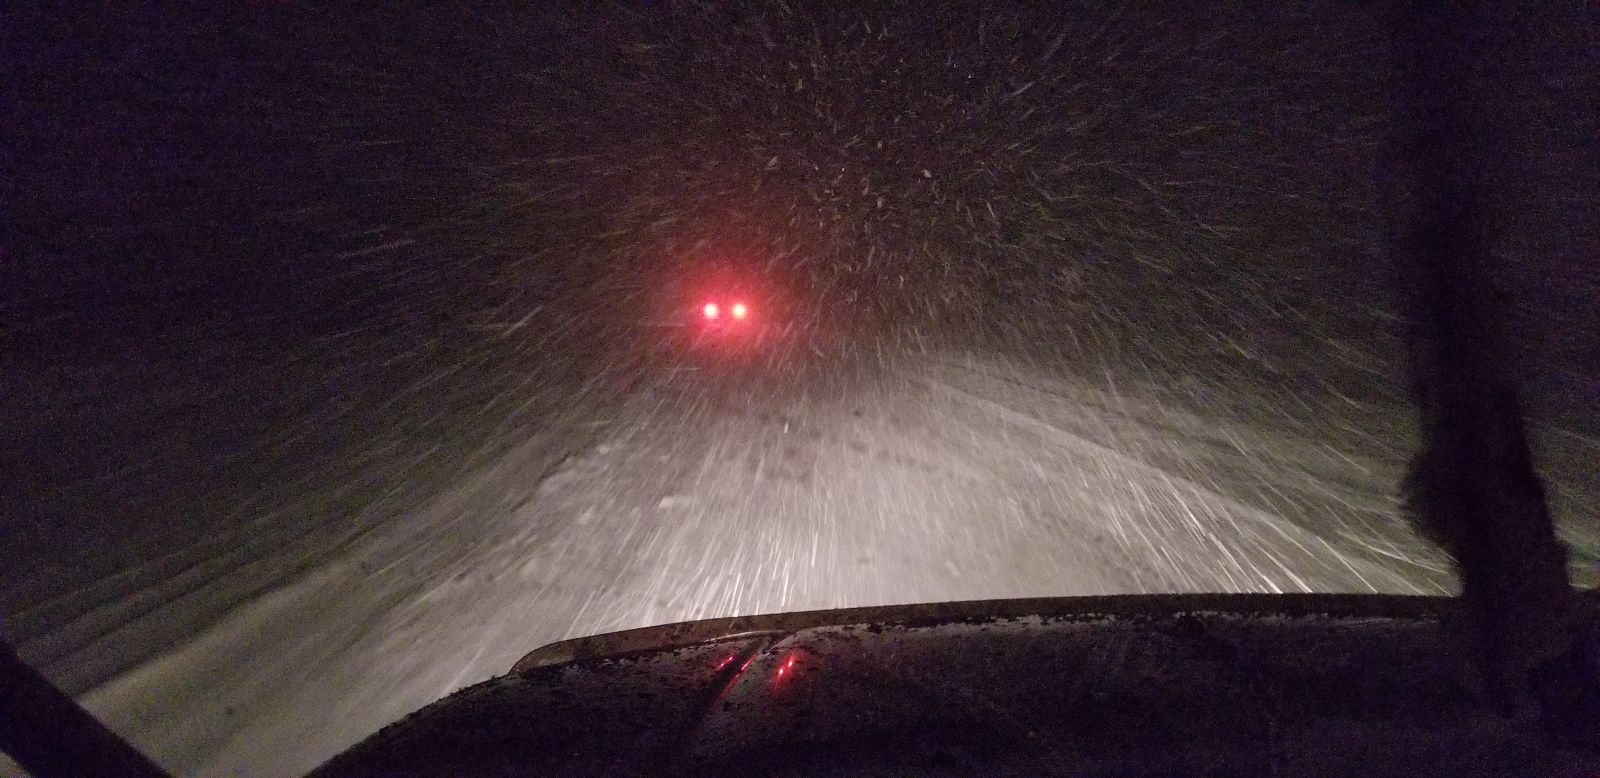 60mph highway and I could barely see 5 ft ahead. No bueno. Definitely never doing this again at night. Well... At least not without a crazy light setup